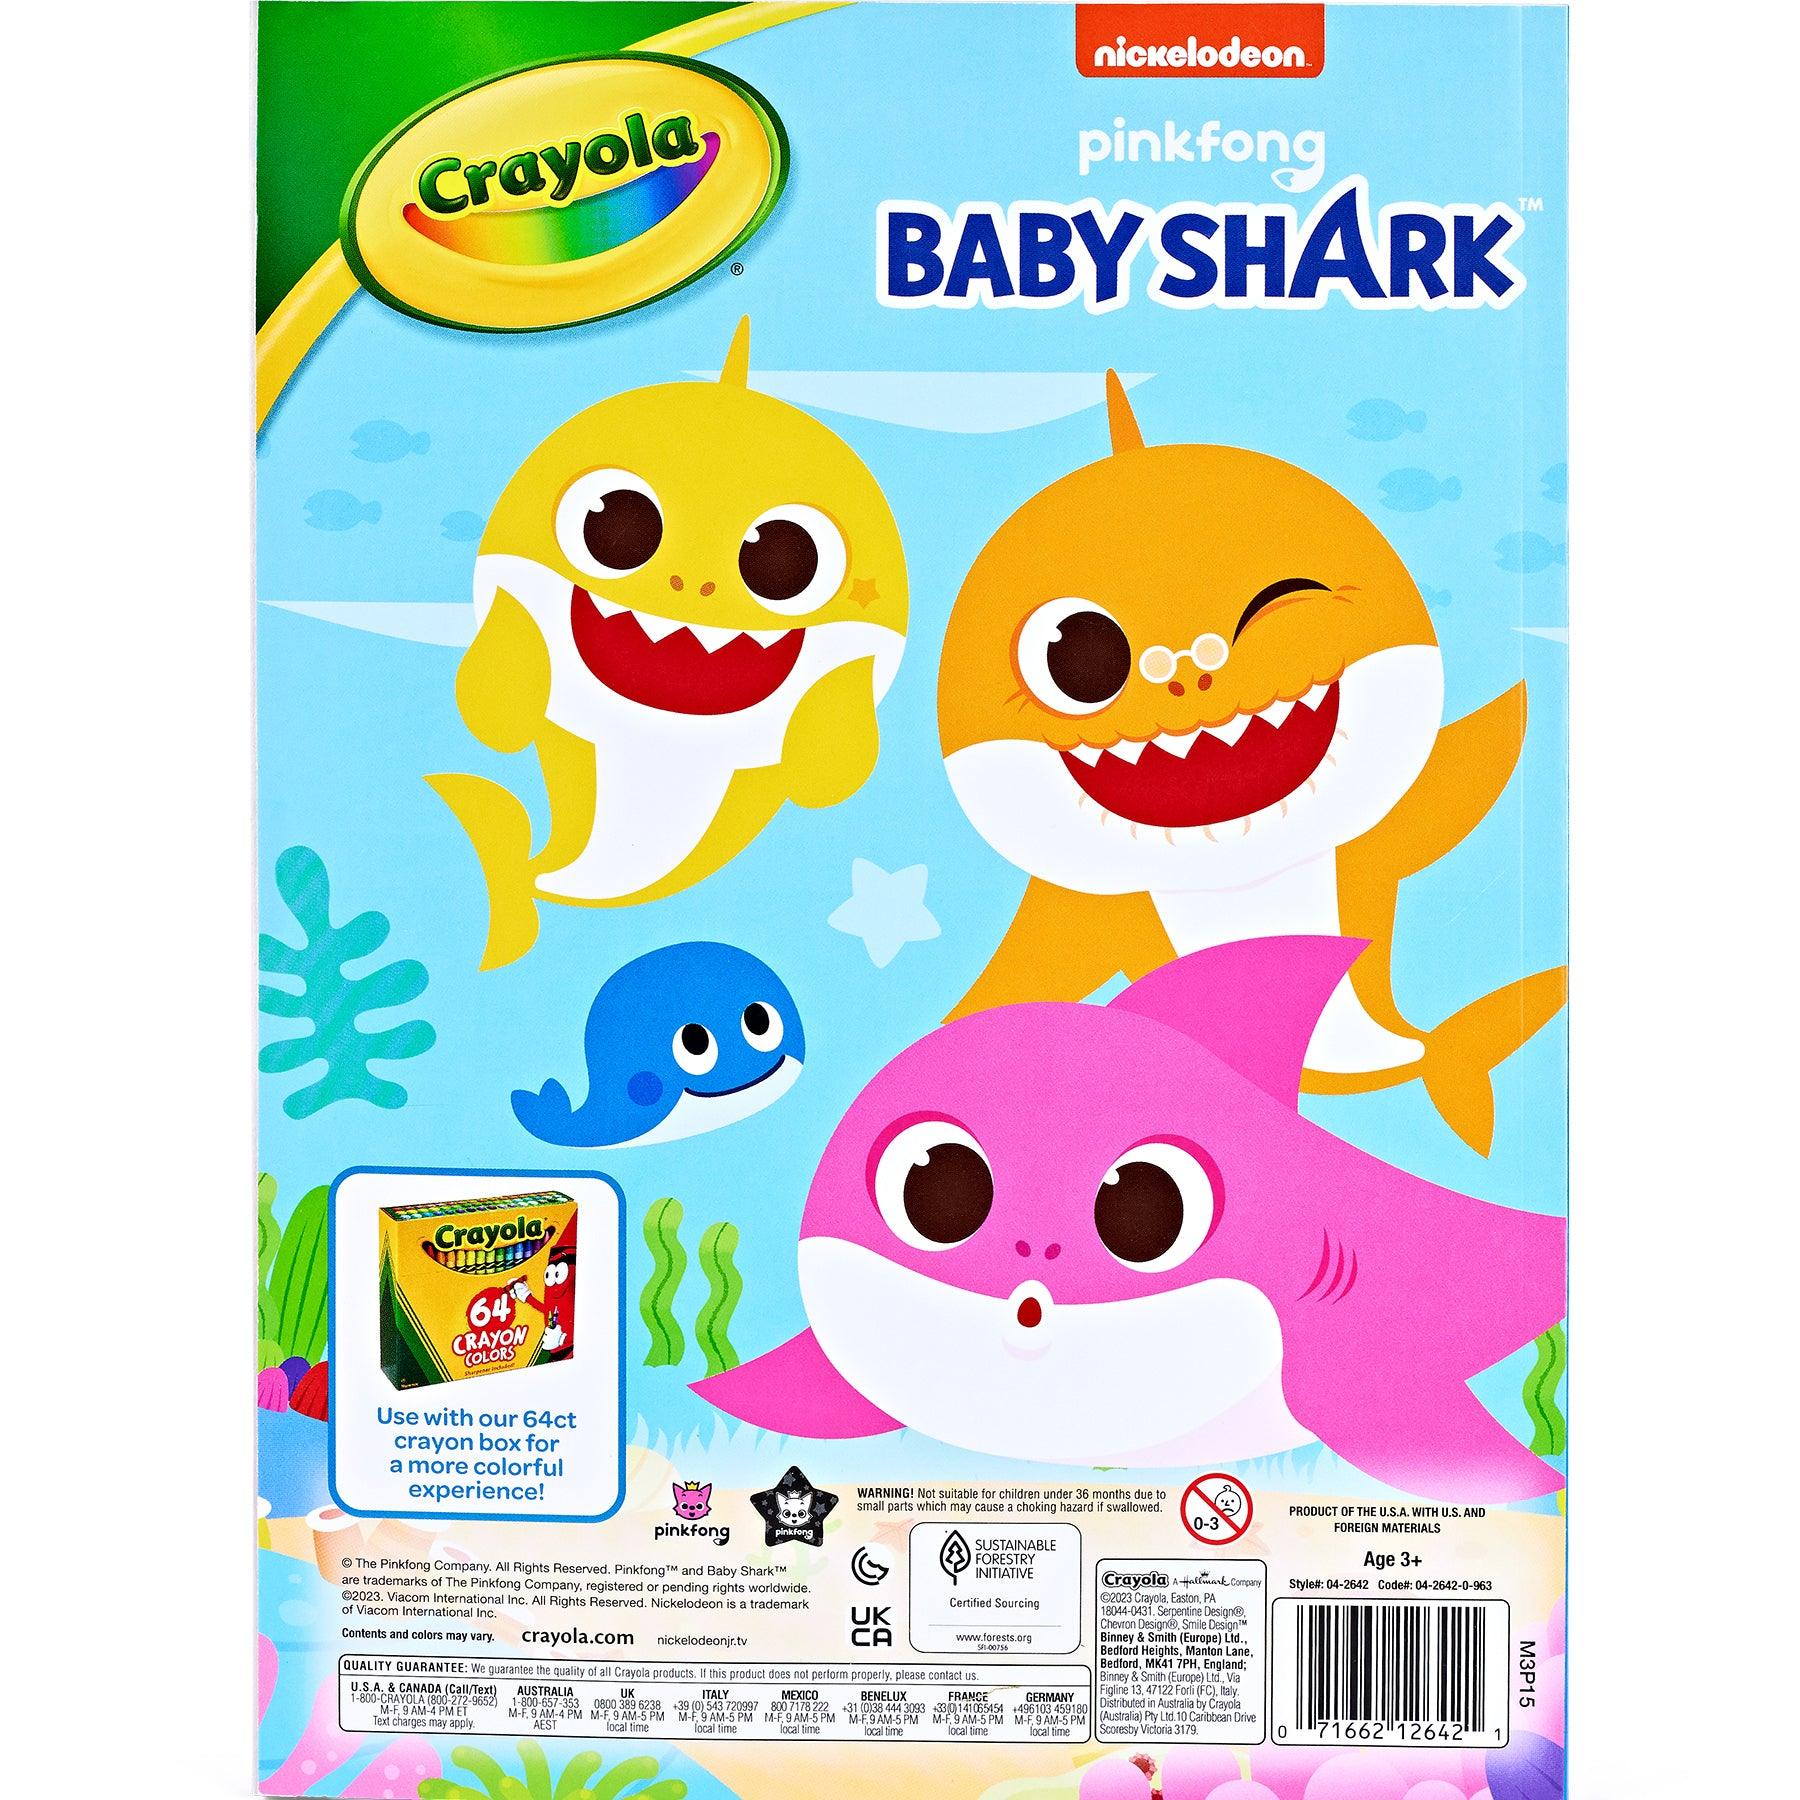 Coloring Book, Baby Shark, 96 Pages, Pack of 8 - Loomini